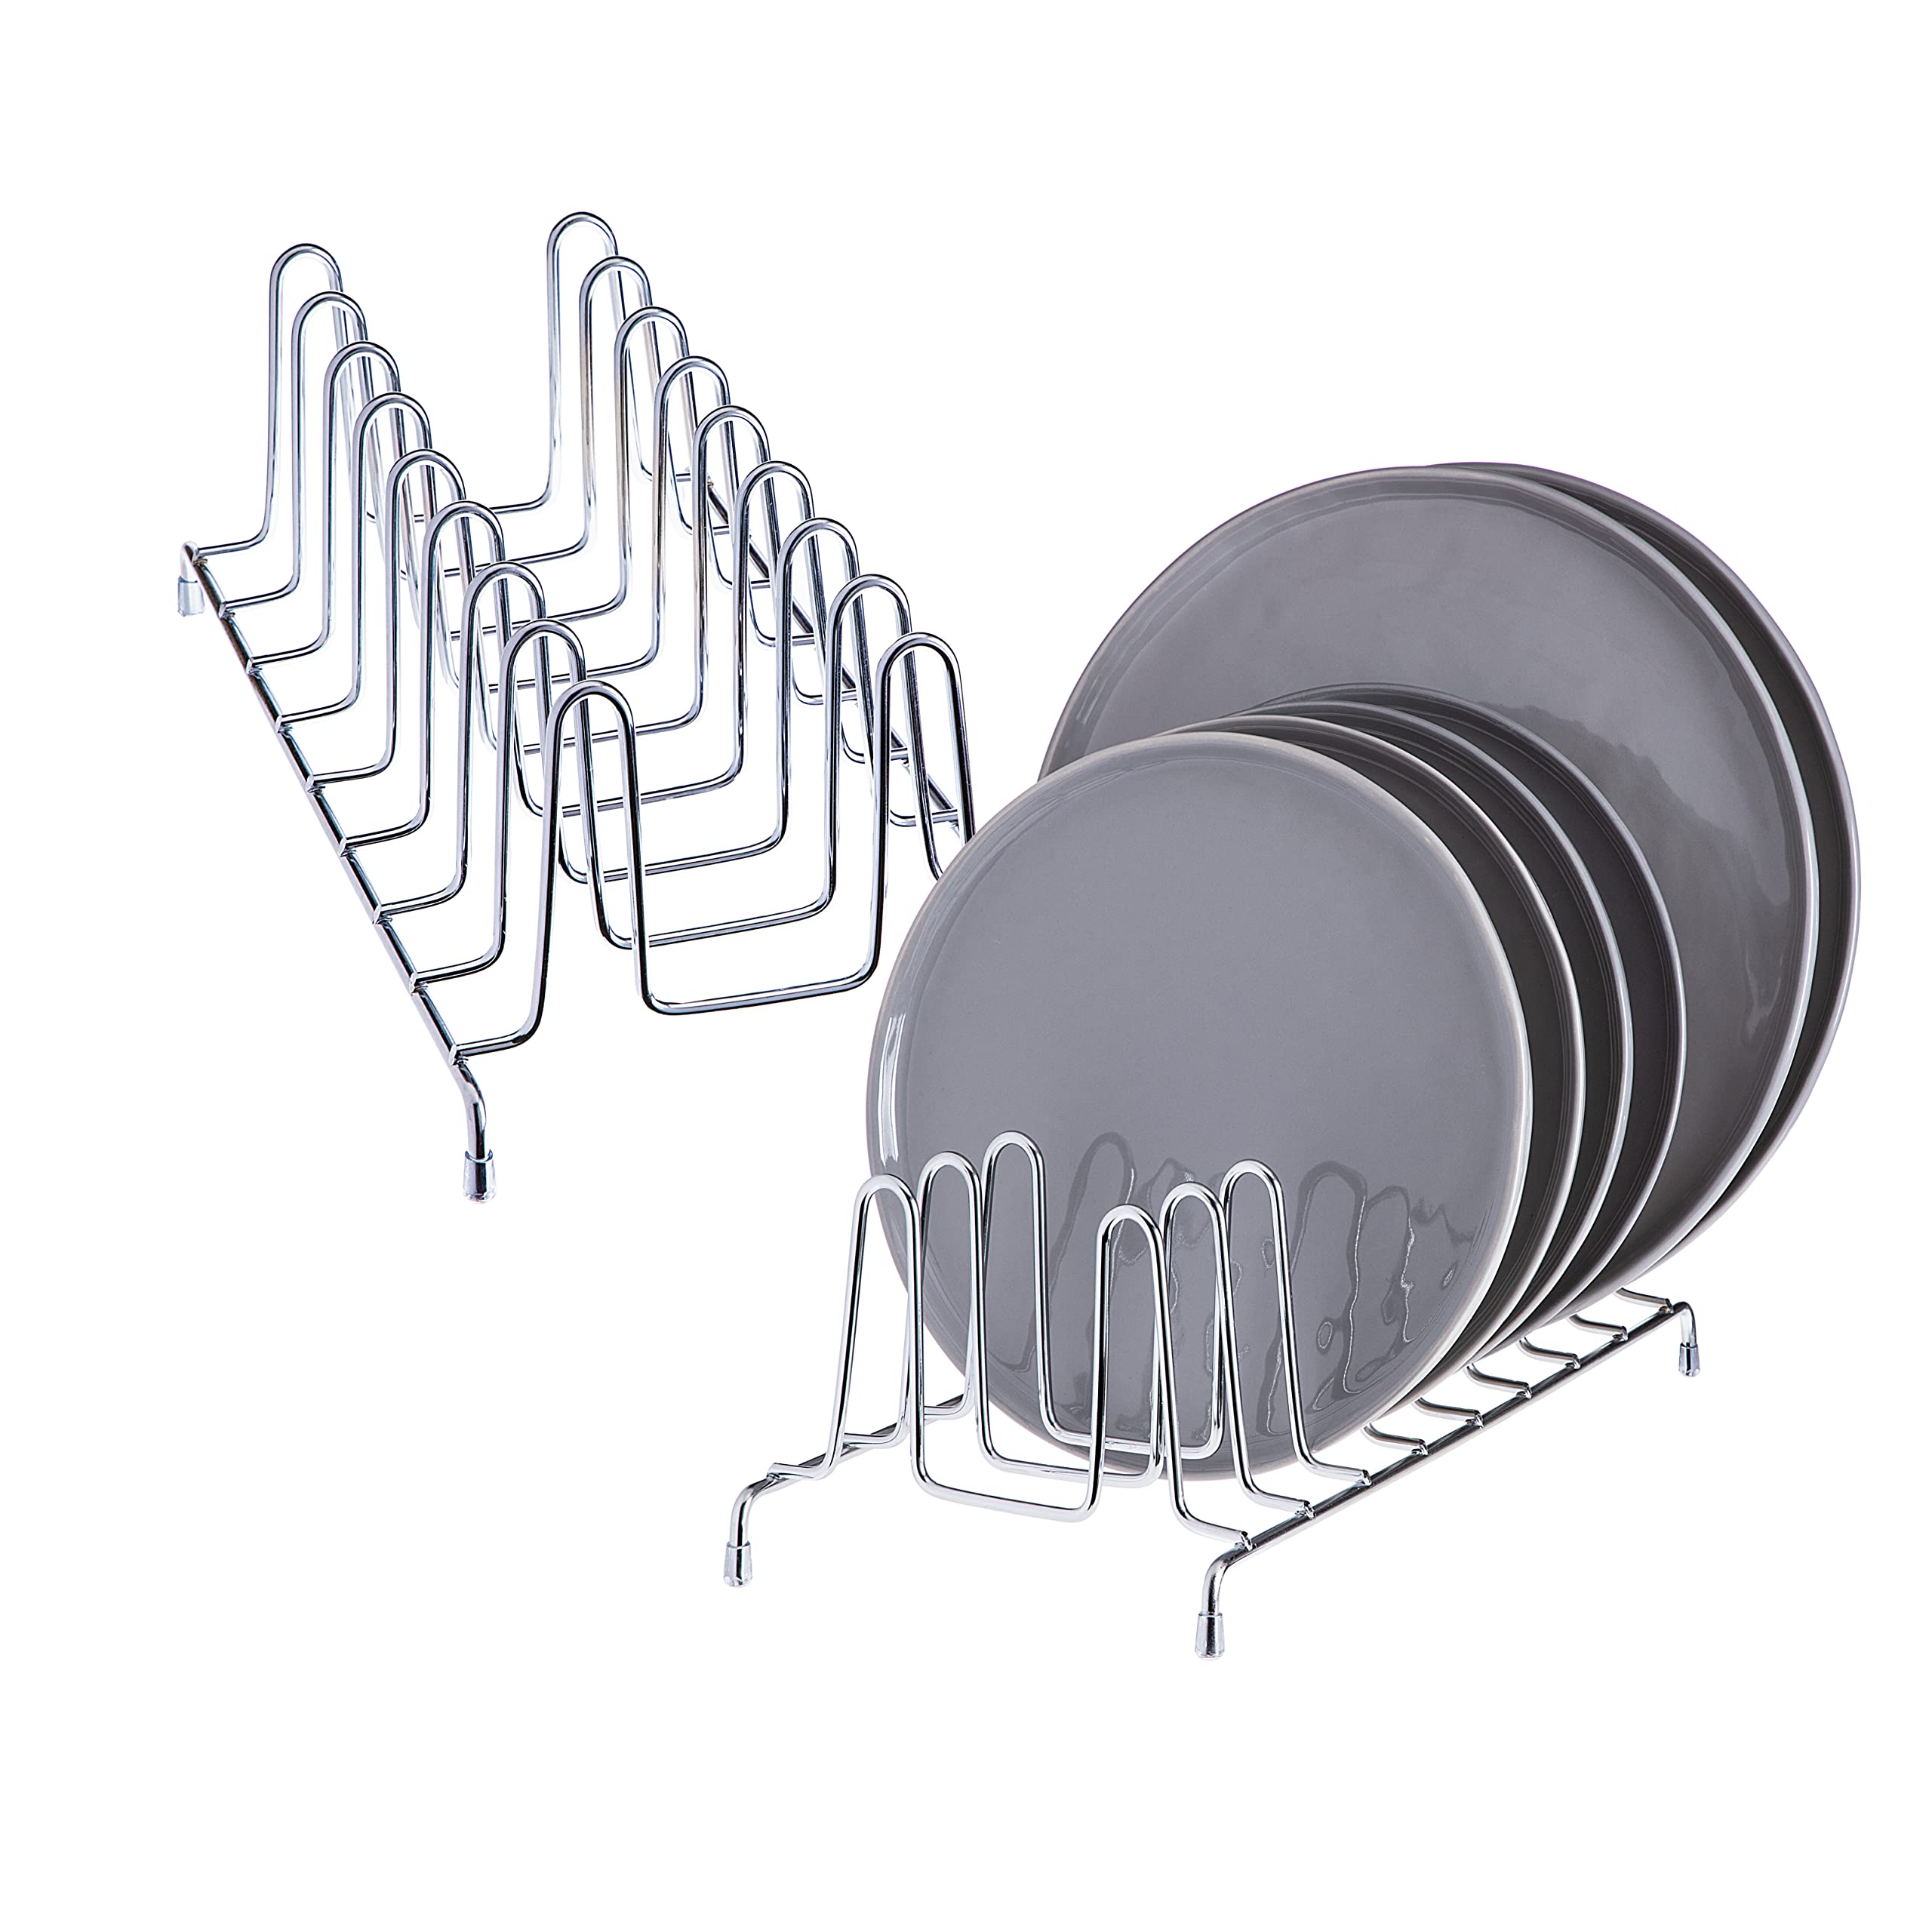 SIMPLEMADE Kitchen Dish Rack Organizer - 2 Wire Metal Cabinet Organizers and Storage Rack for Plates, Dishes, Pots, Pot Lids, Pan Lids, Container Lids - Shelf, Counter & Pantry Organization (Chrome)  - Like New